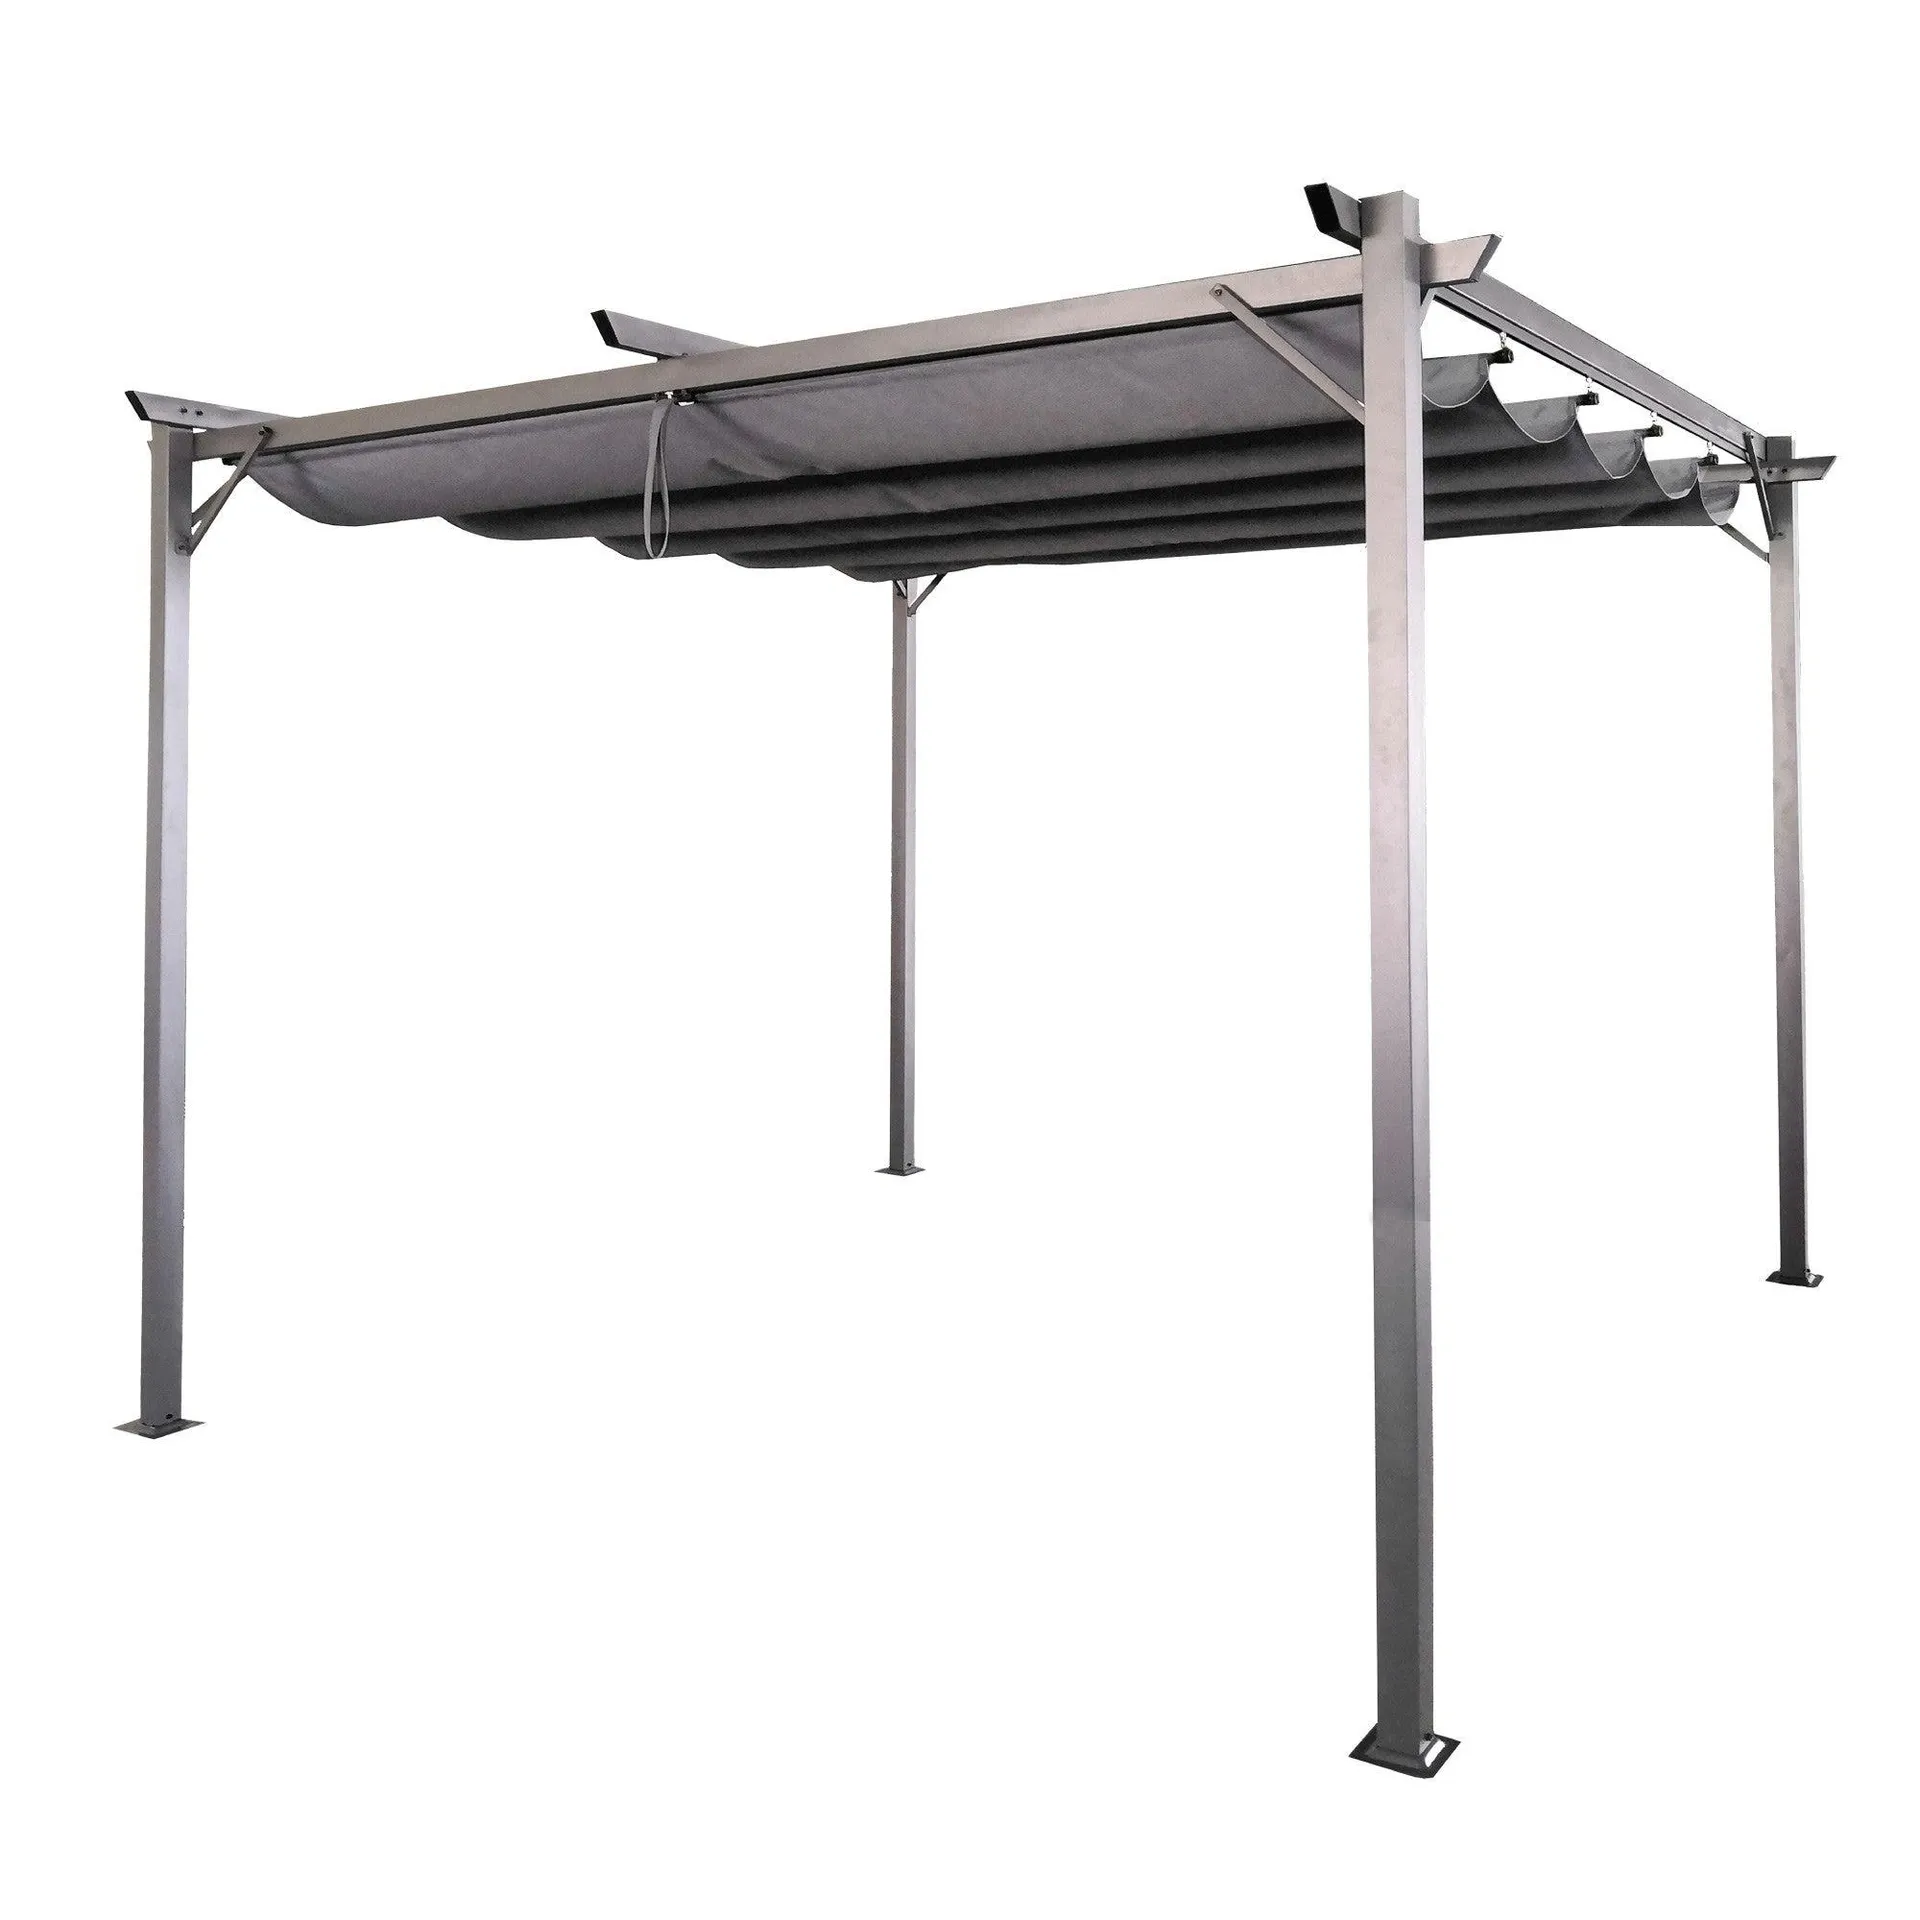 Silver & Stone Palma Steel Pergola with Rectangle Canopy 3m x 3m